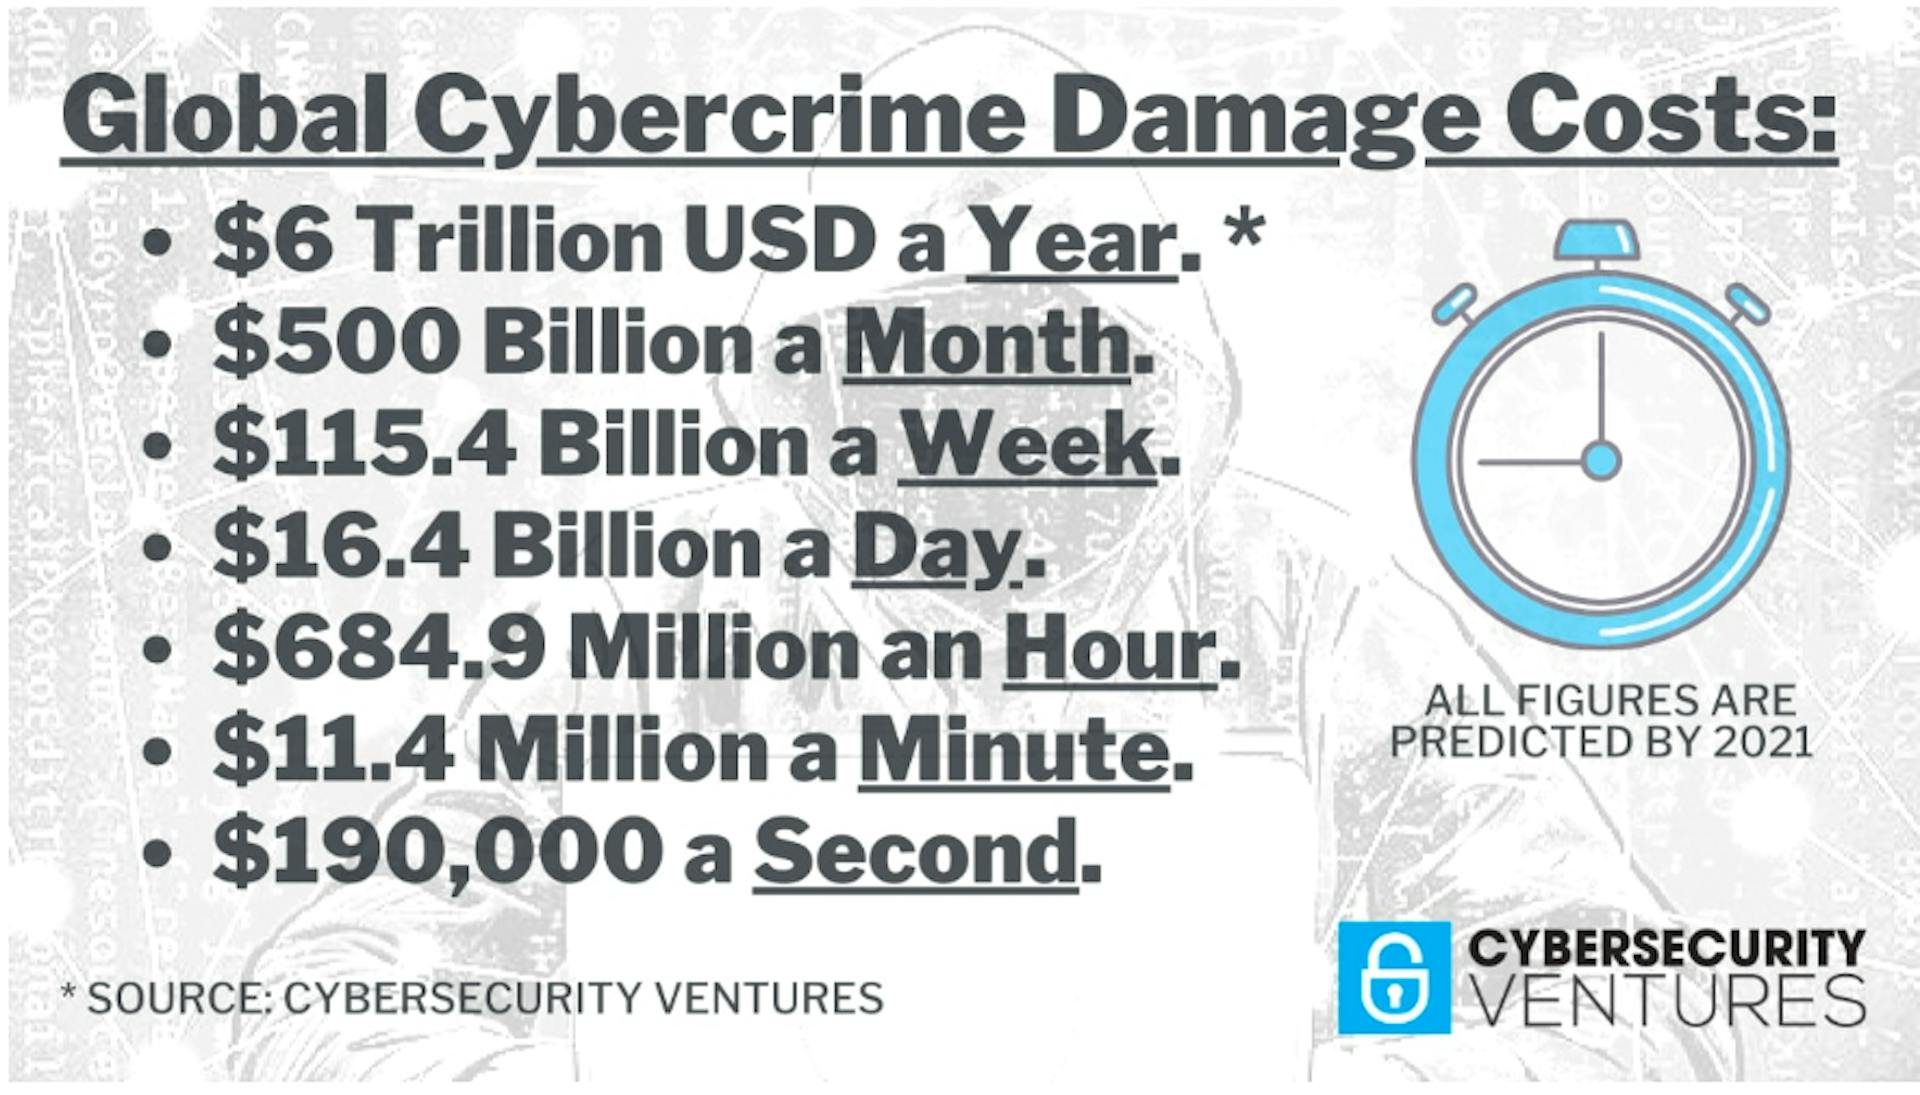 Figure-17: Source (https://cybersecurityventures.com/cybercrime-damages-6-trillion-by-2021/)